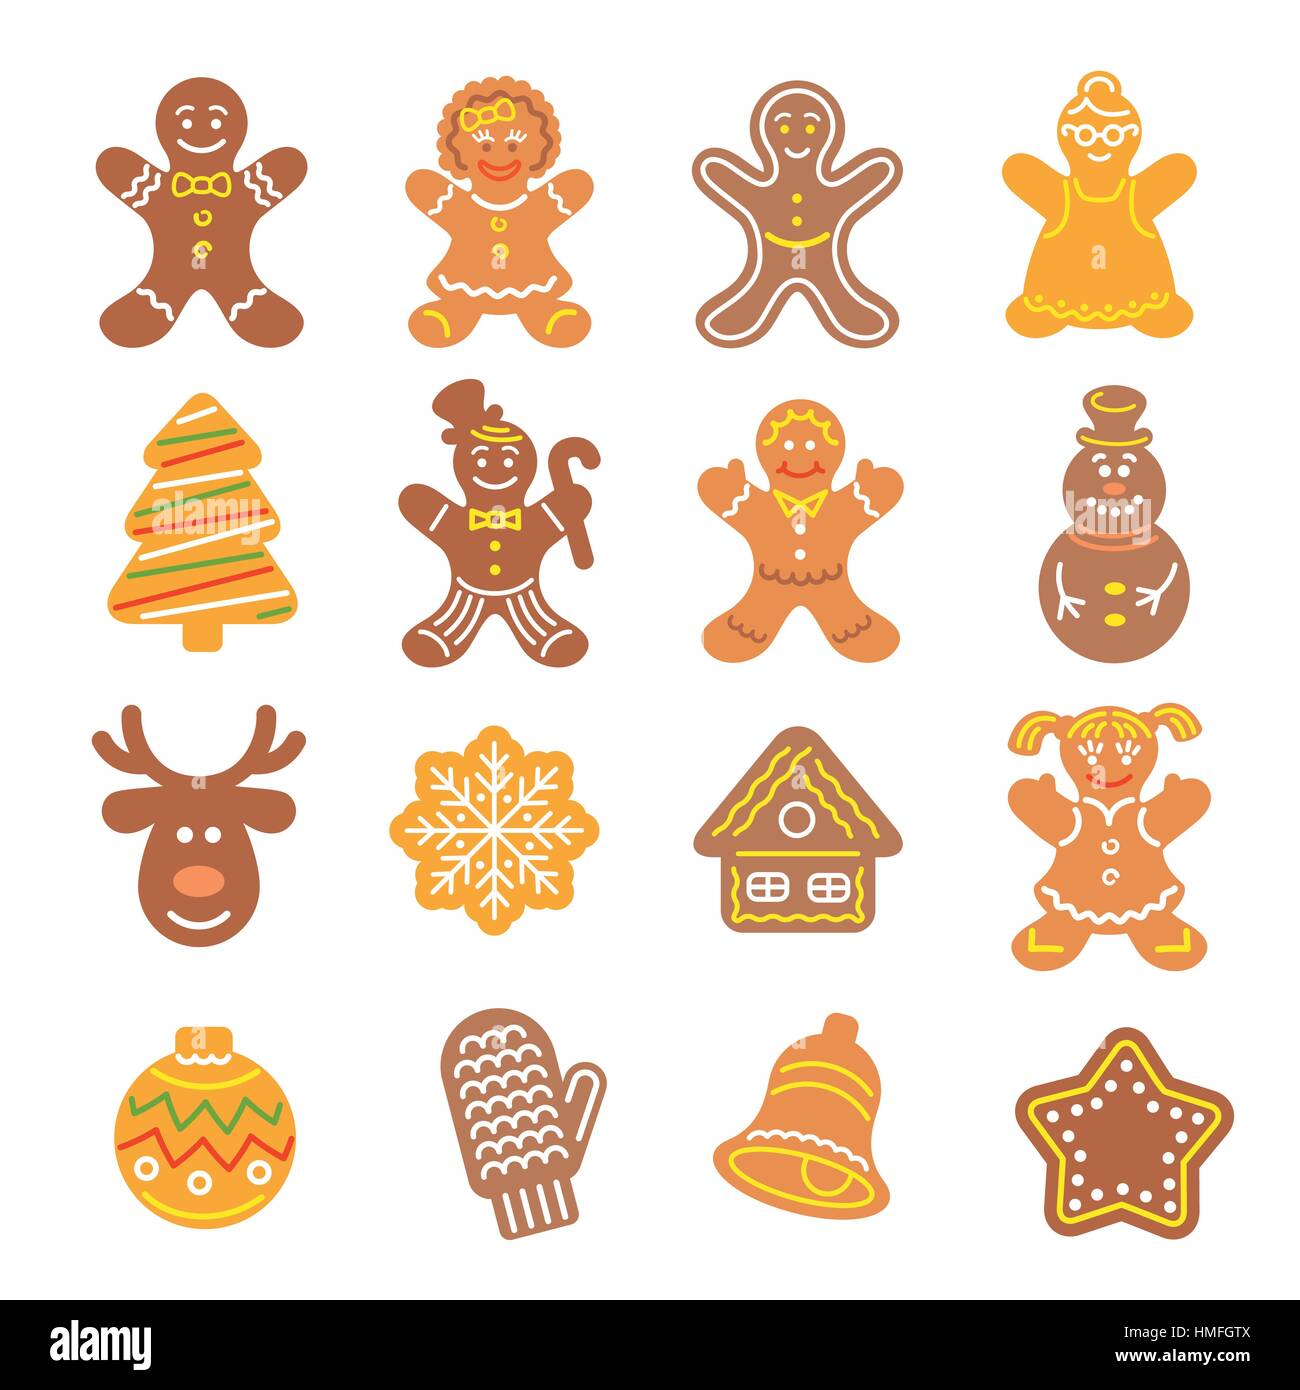 Set of flat vector icons of different Christmas cookies. Gingerbread men, Christmas tree, reindeer, snowflake, mitten, bell and other holiday symbols, Stock Vector